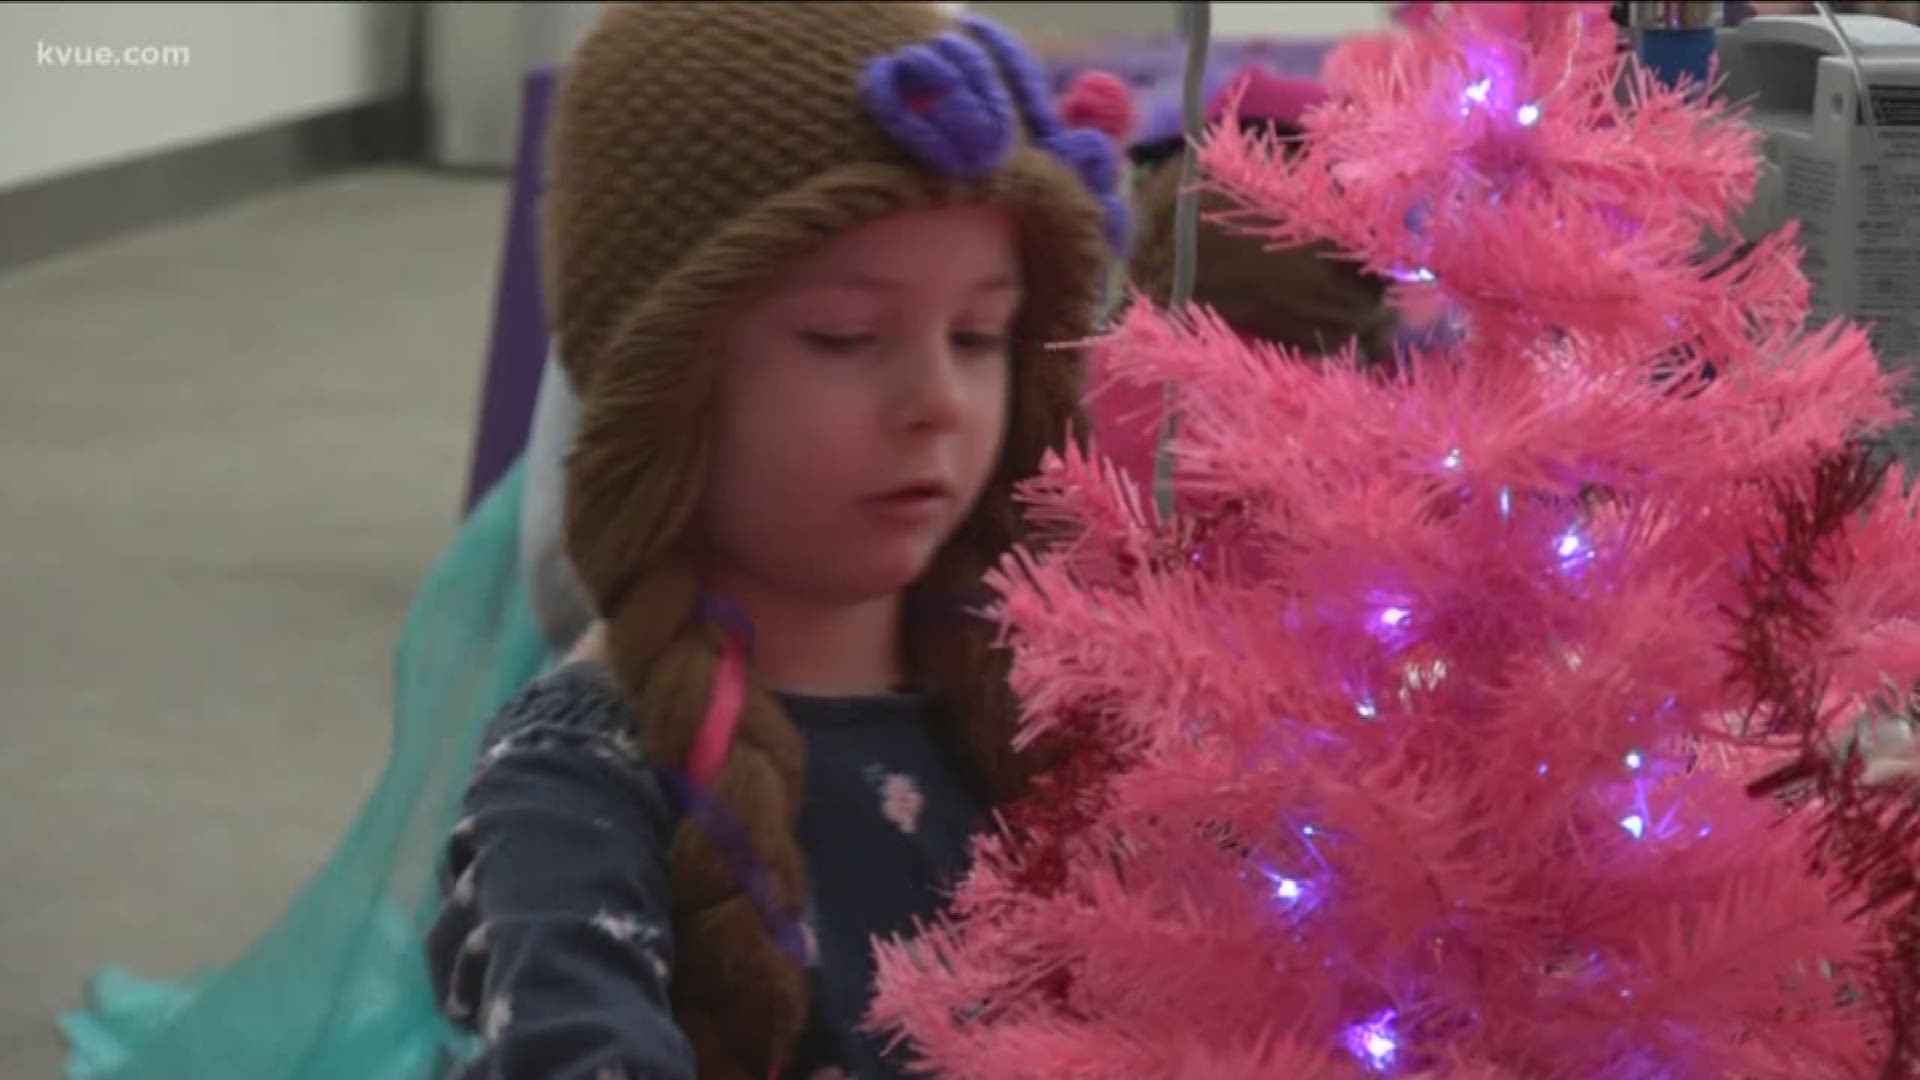 Not everybody gets to be home for the holidays.
Especially those who are suffering form an illness. To make the holidays a little brighter -- volunteers helped Dell Children's patients decorate Christmas trees for their rooms.
STORY: http://www.kvue.com/n